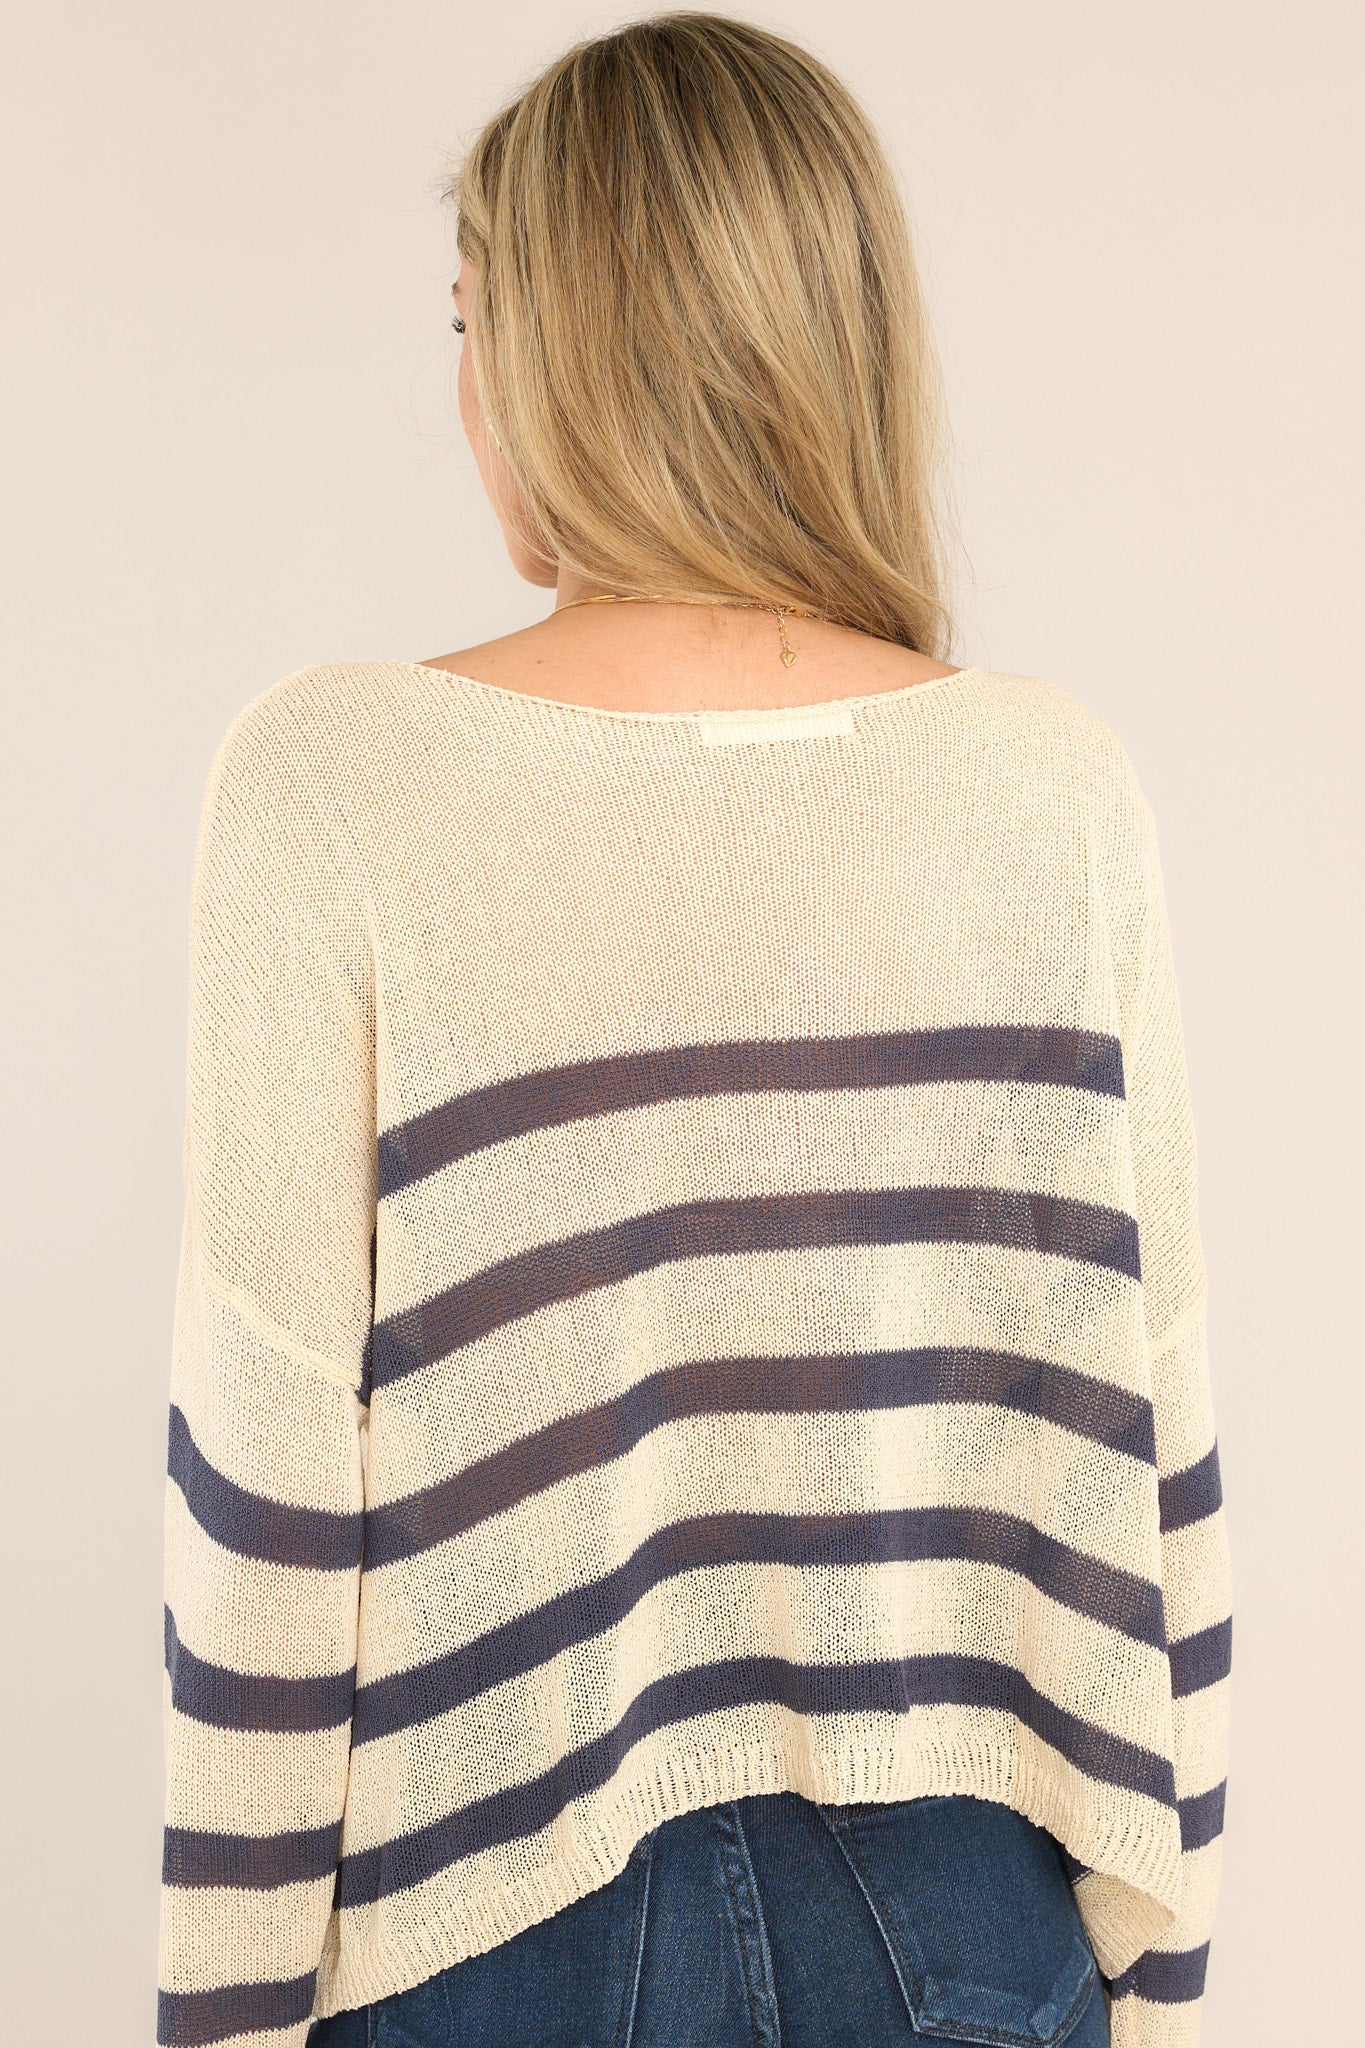 Back view of this sweater that features a wide crew neckline, dropped shoulders, a lightweight knitted material, classic stripes, and long sleeves.